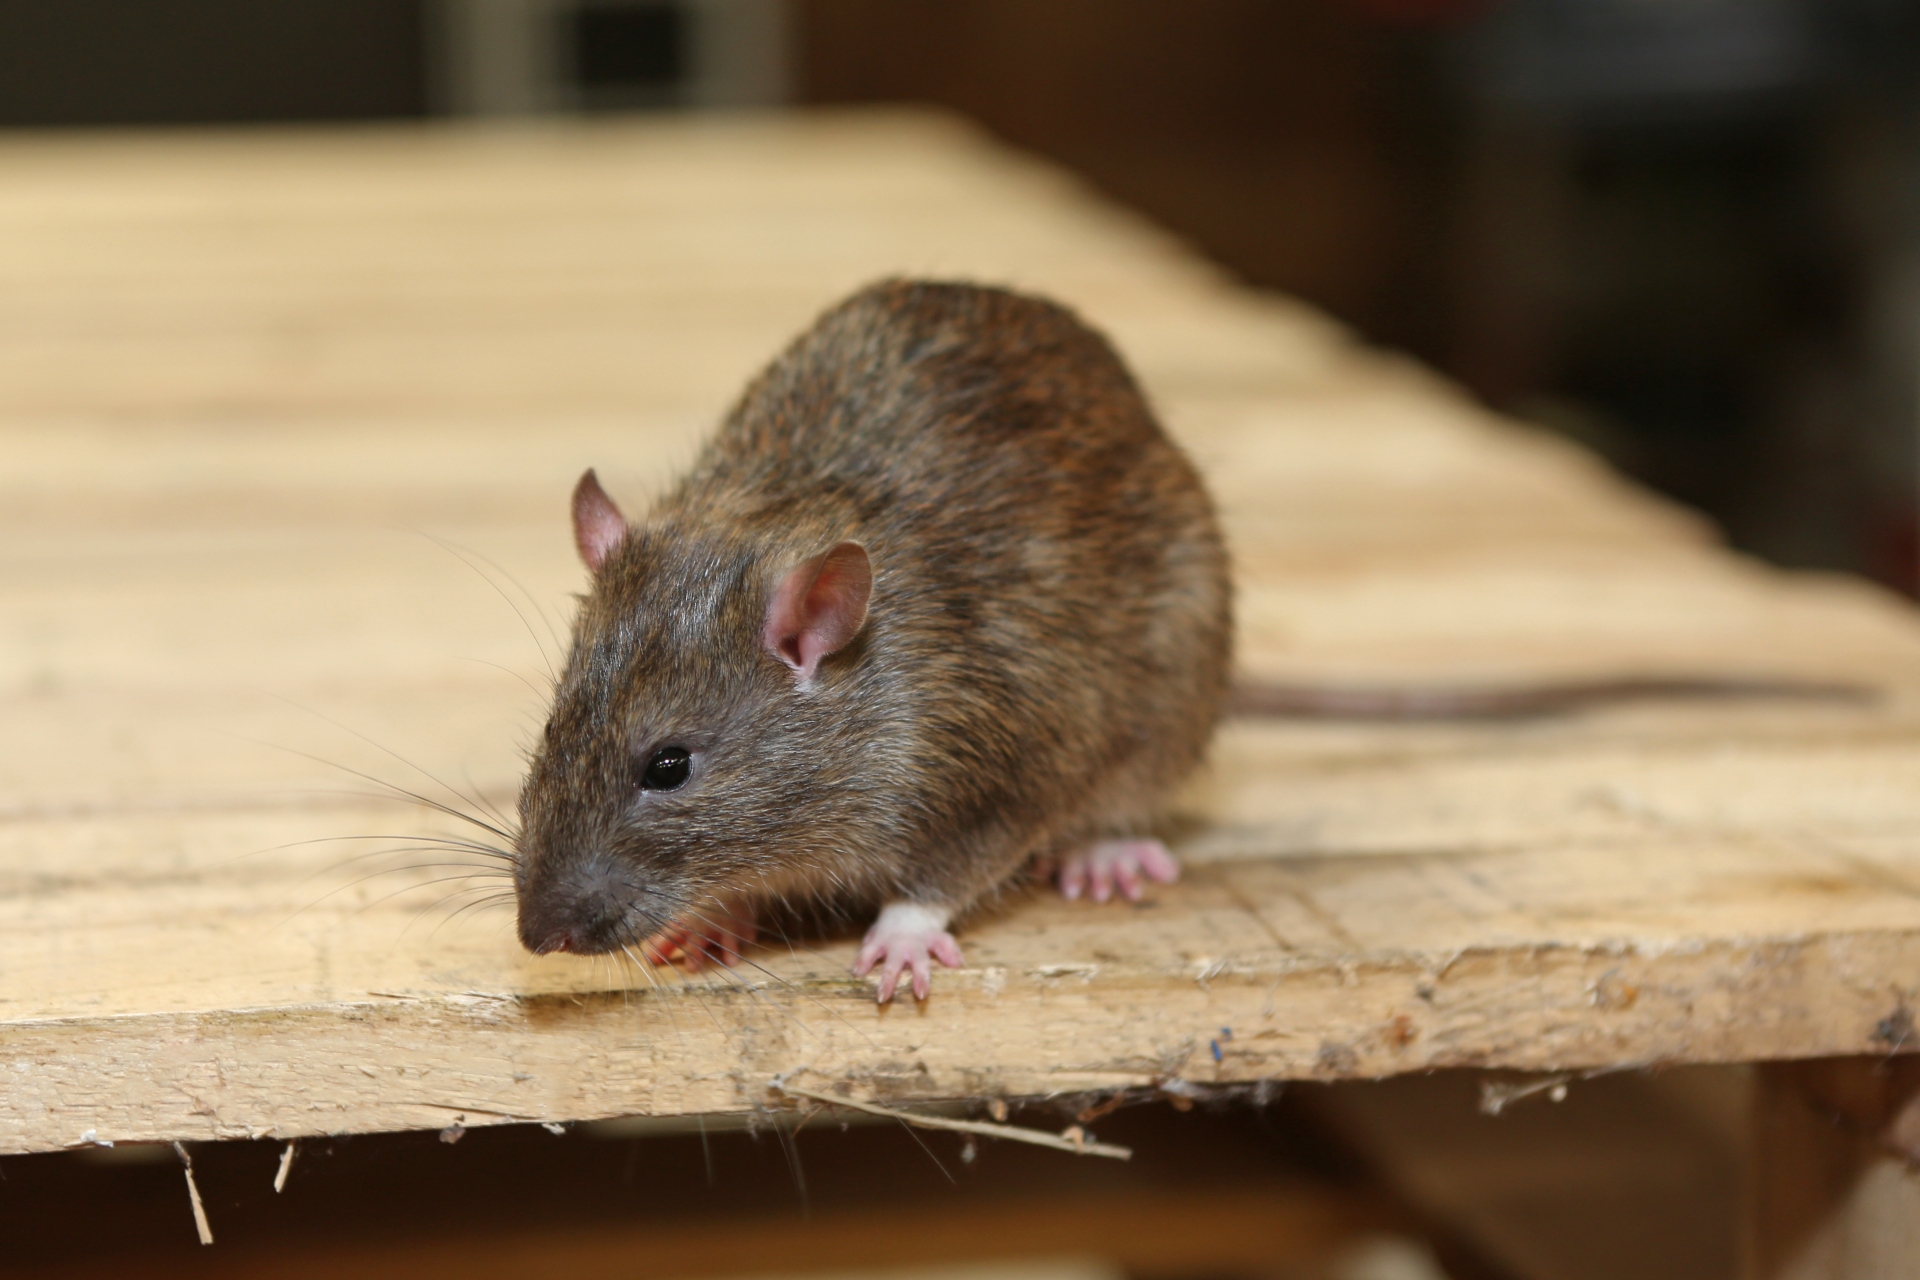 Rat extermination, Pest Control in Rickmansworth, Chorleywood, Croxley Green, WD3. Call Now 020 8166 9746